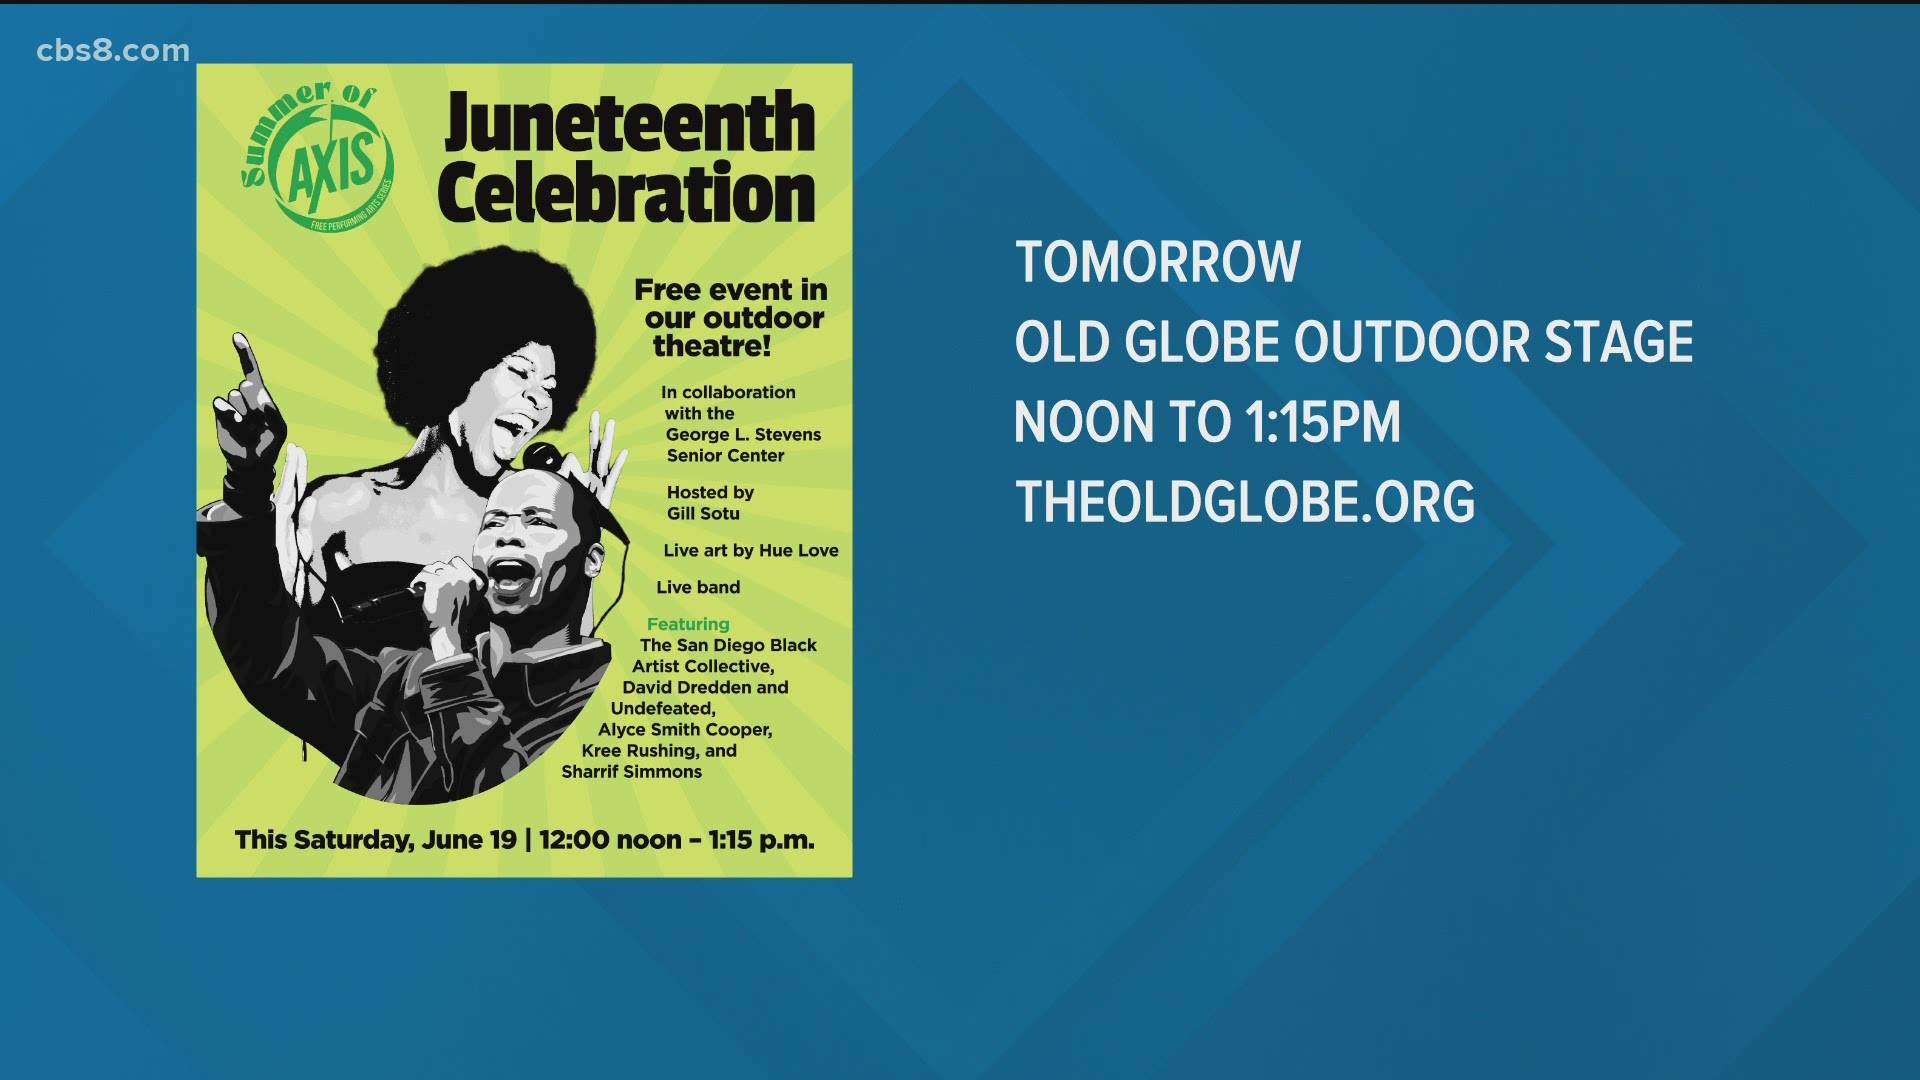 With Juneteenth a federal holiday, there's more to celebrate than ever before. You can catch poets, comedians and painters at the Old Globe Theatre tomorrow at noon.